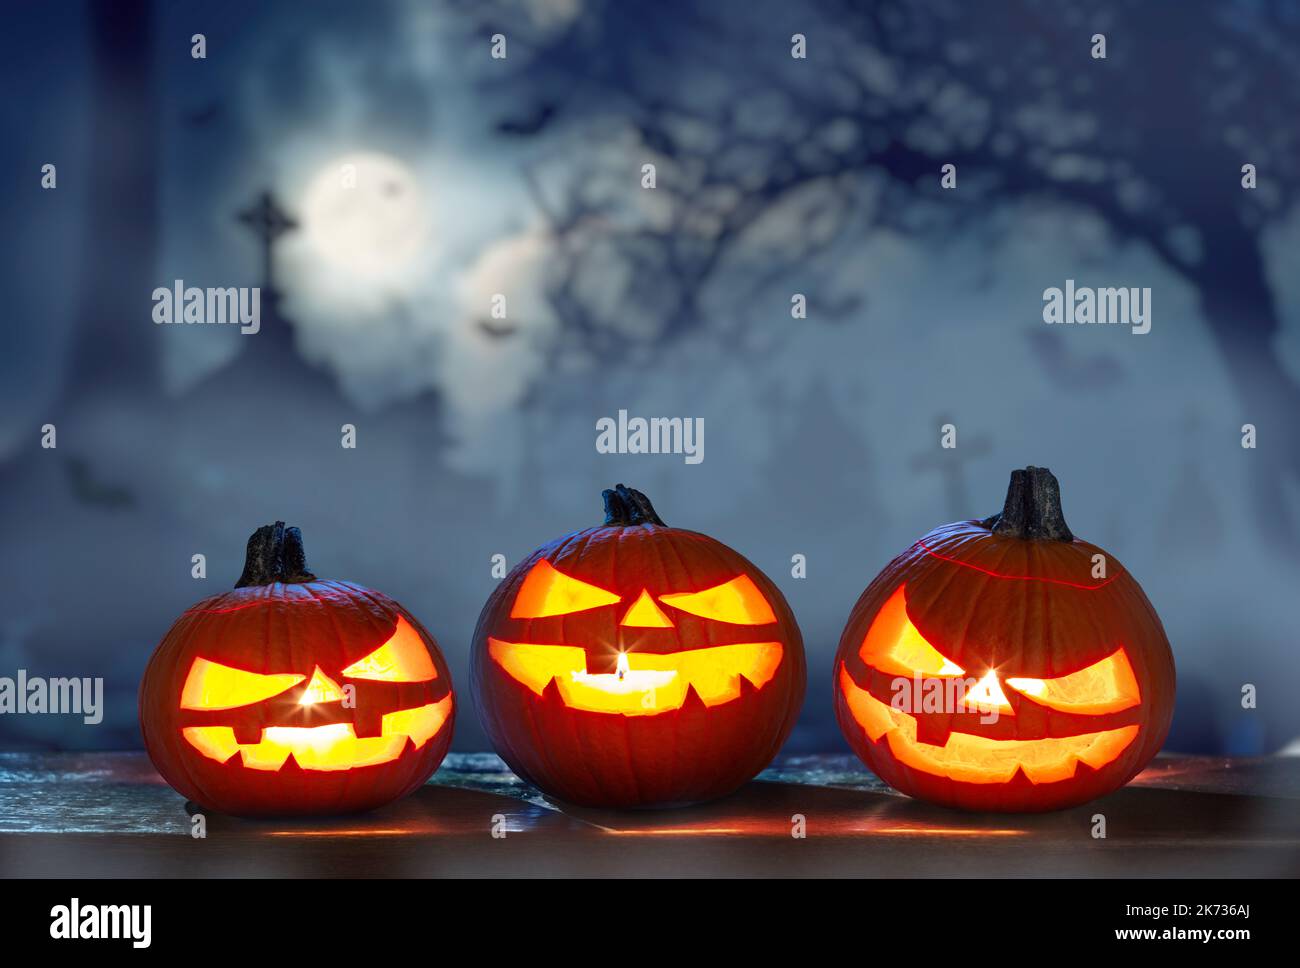 Carved lightening pumpkins for Halloween jack-o'-lanterns with scary smiles to ward of evil spirits on mystery night cemetery background. Halloween ba Stock Photo